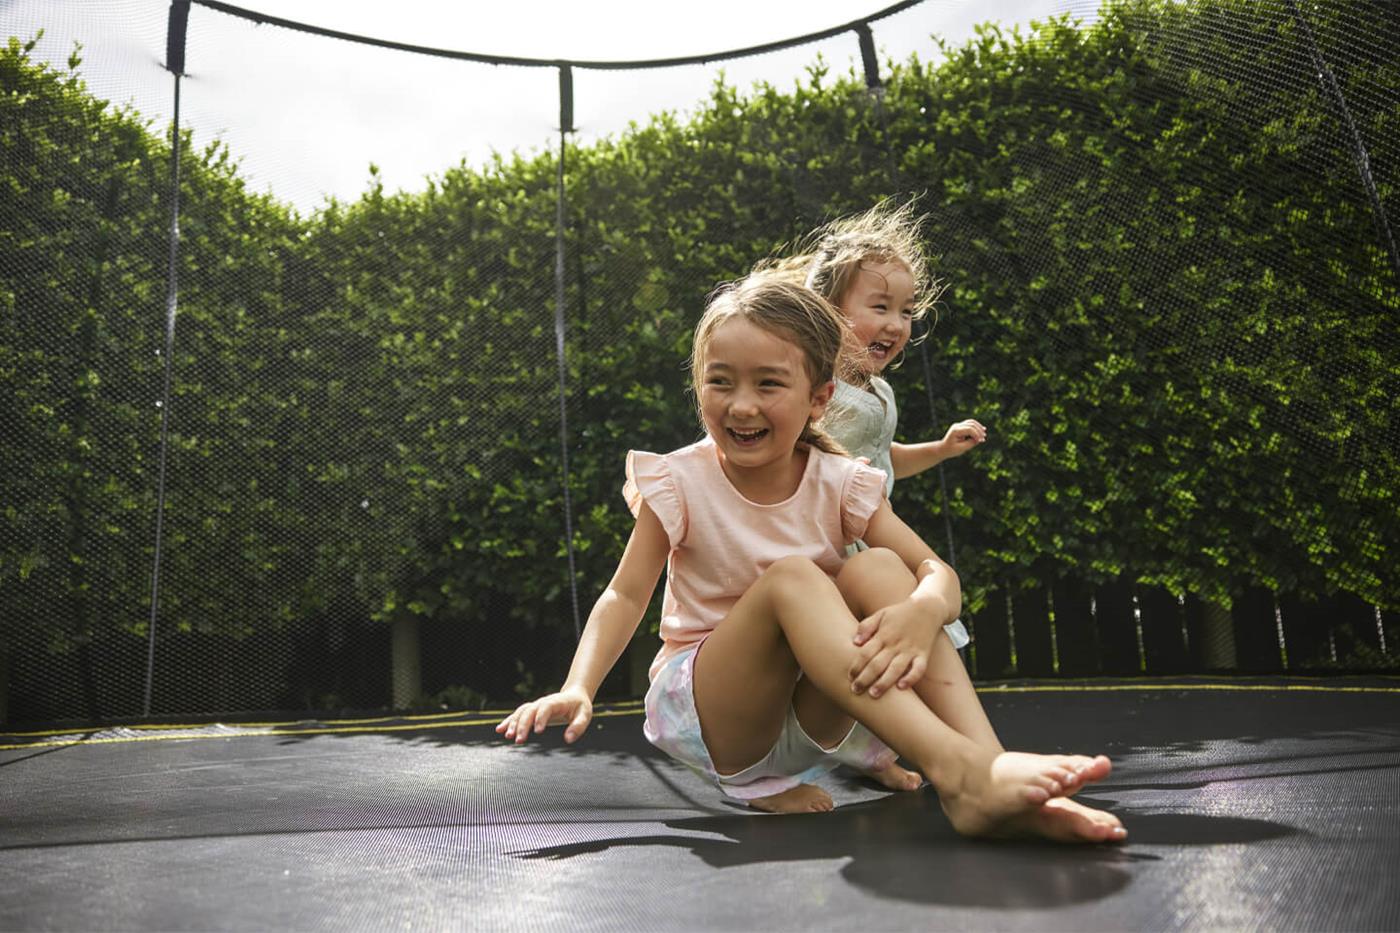 Two young children playing on a trampoline